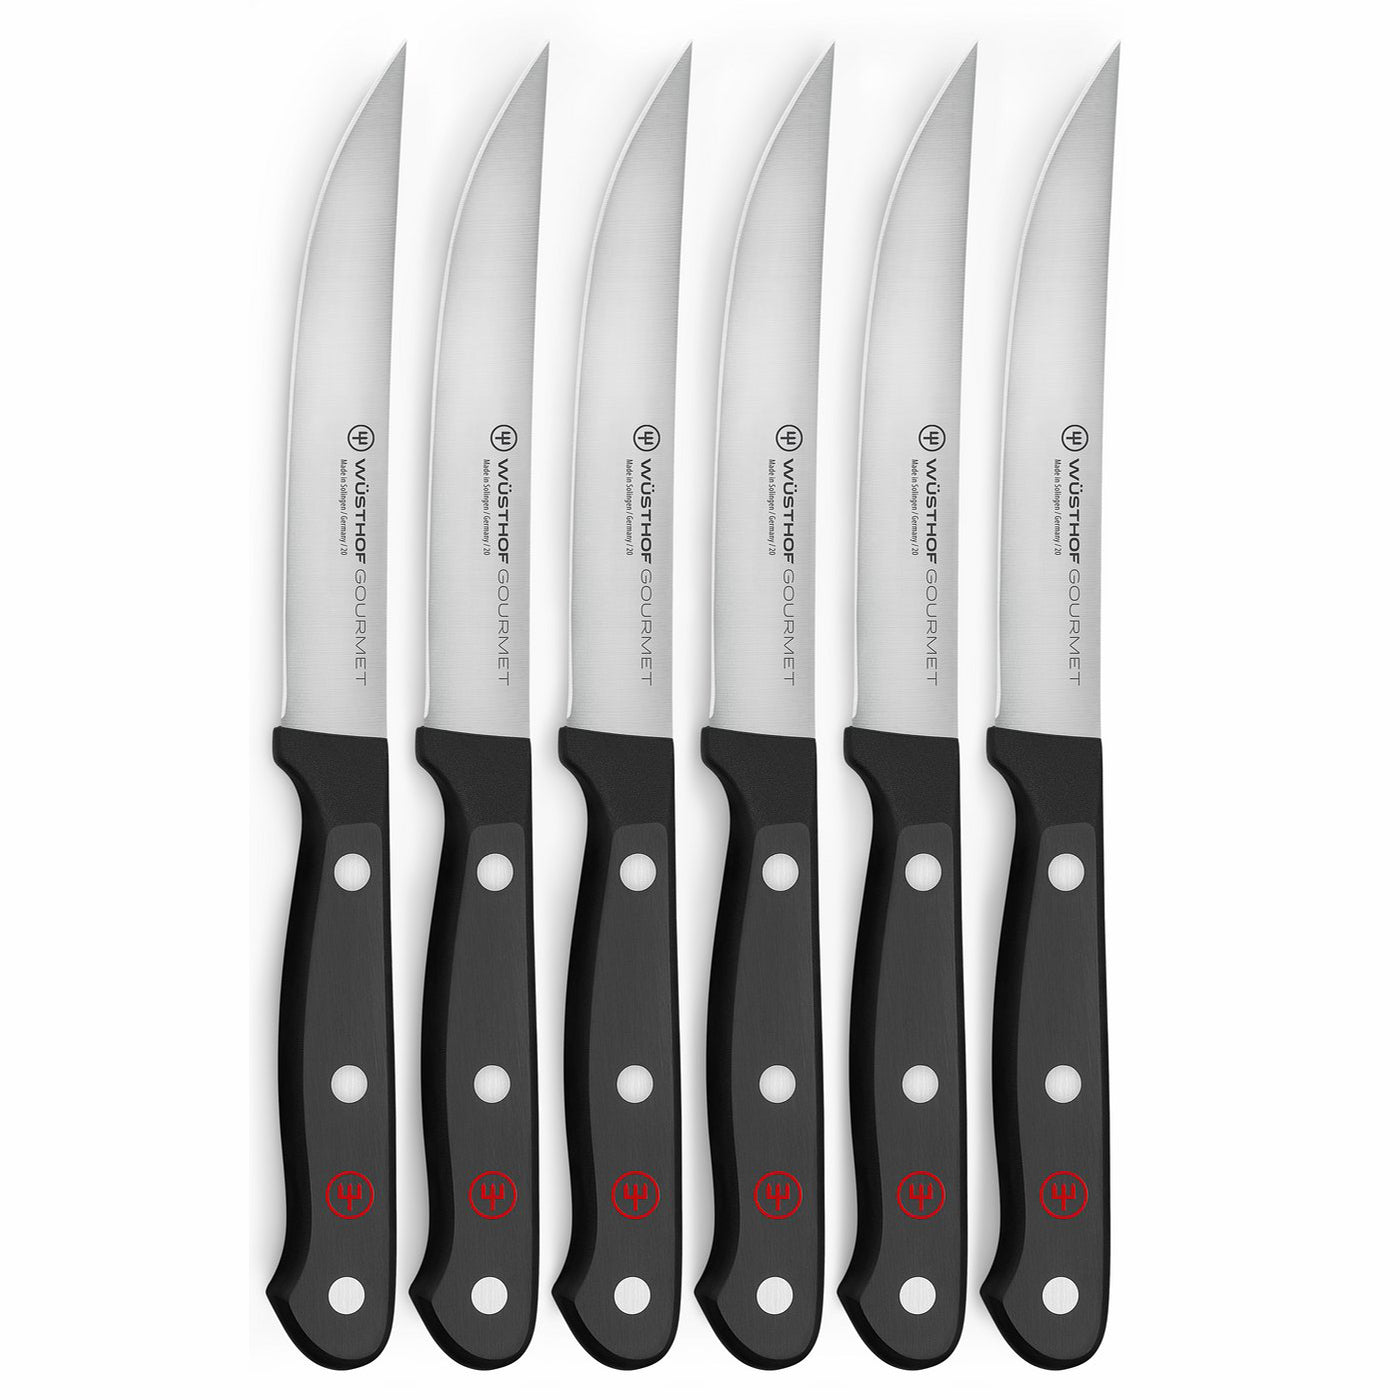 Wusthof Stainless Steel Gourmet 4 Piece Steak Knife Set with White Handles